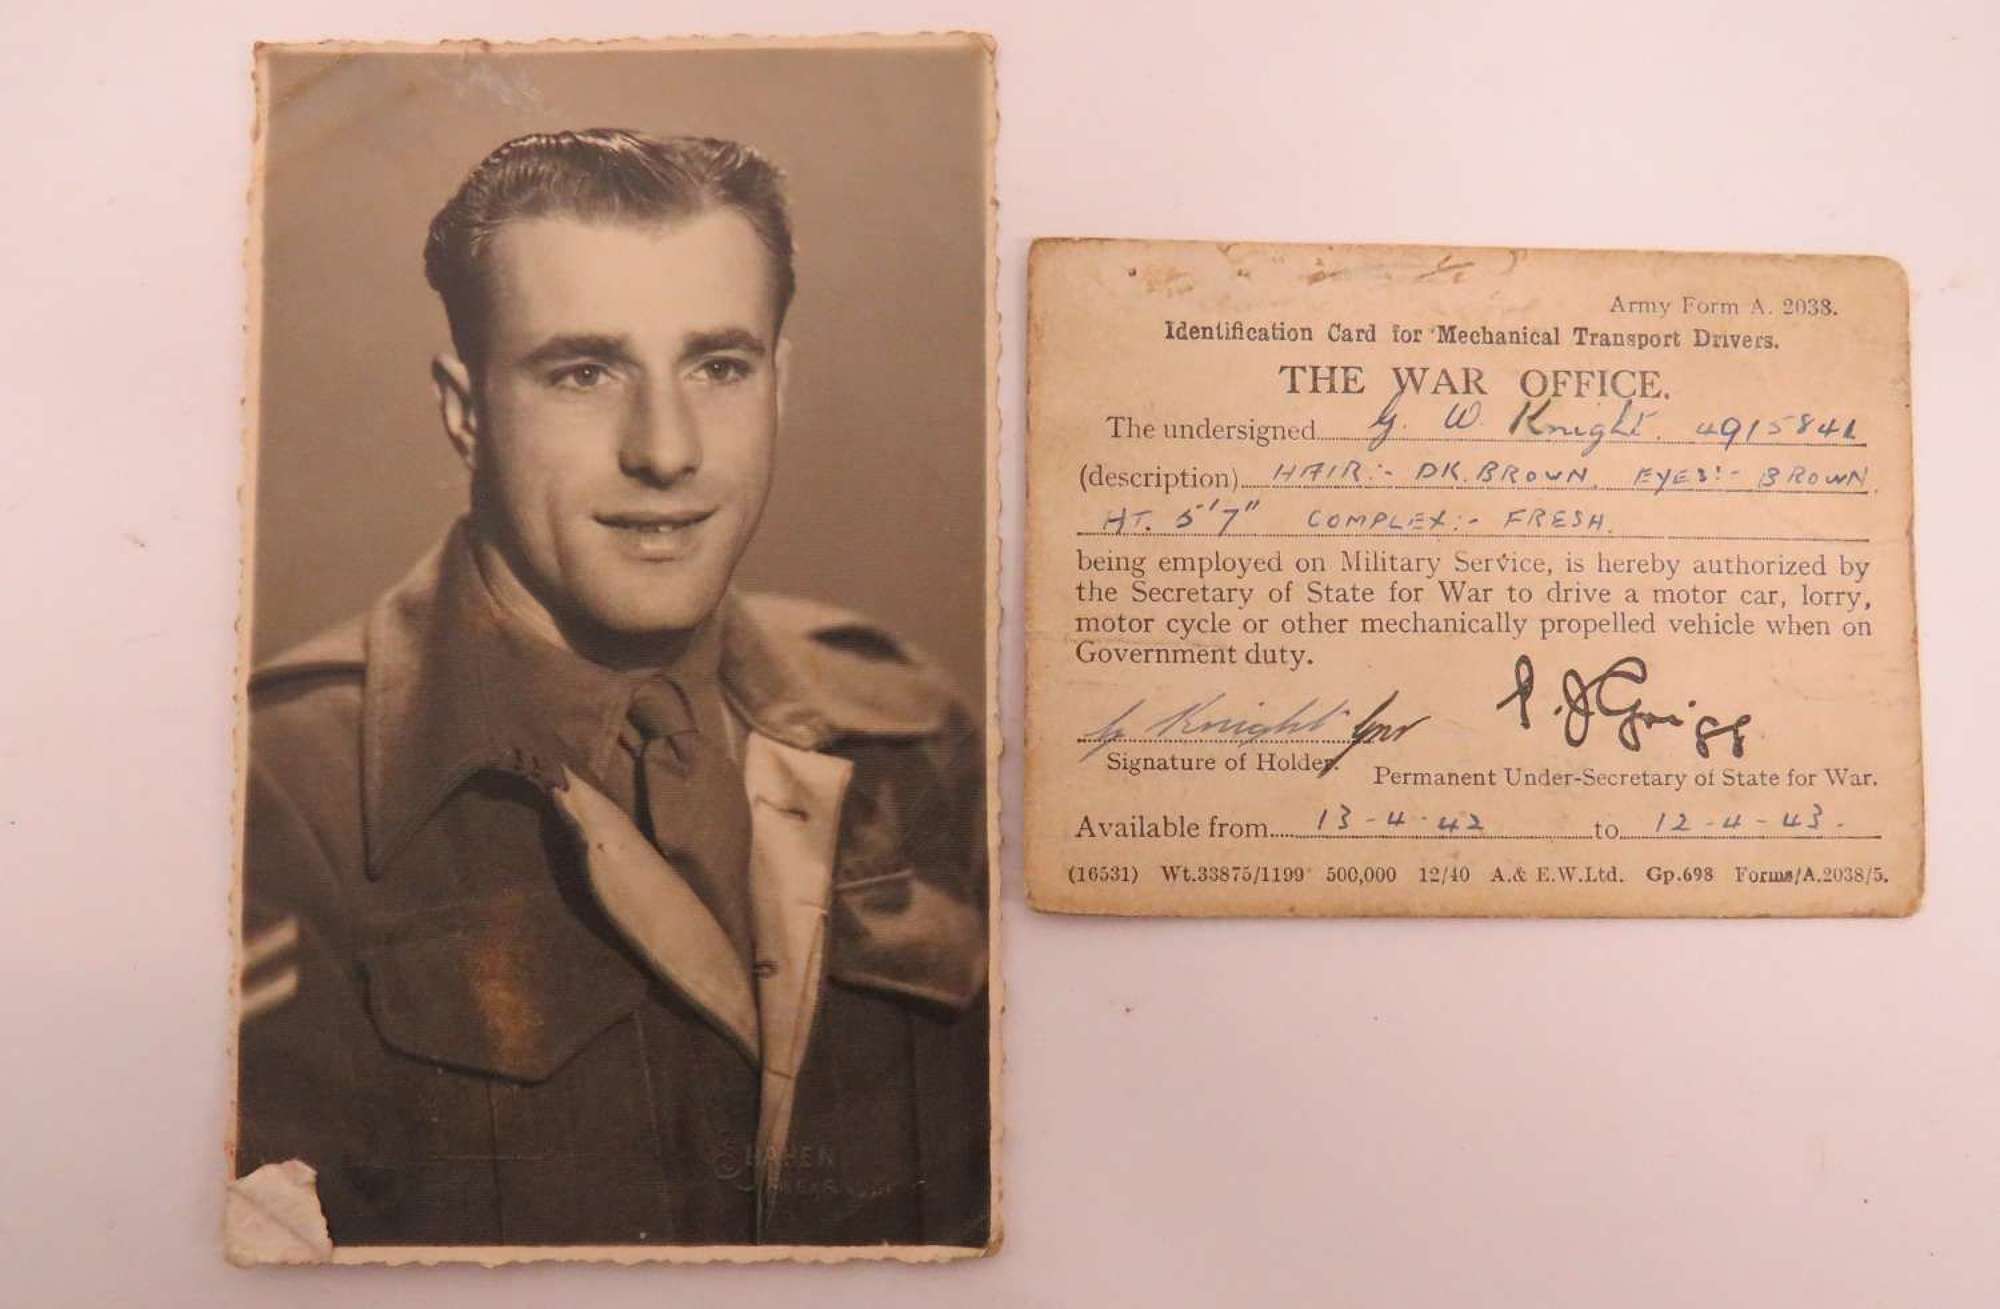 WW 2 Army Drivers Card and Photo